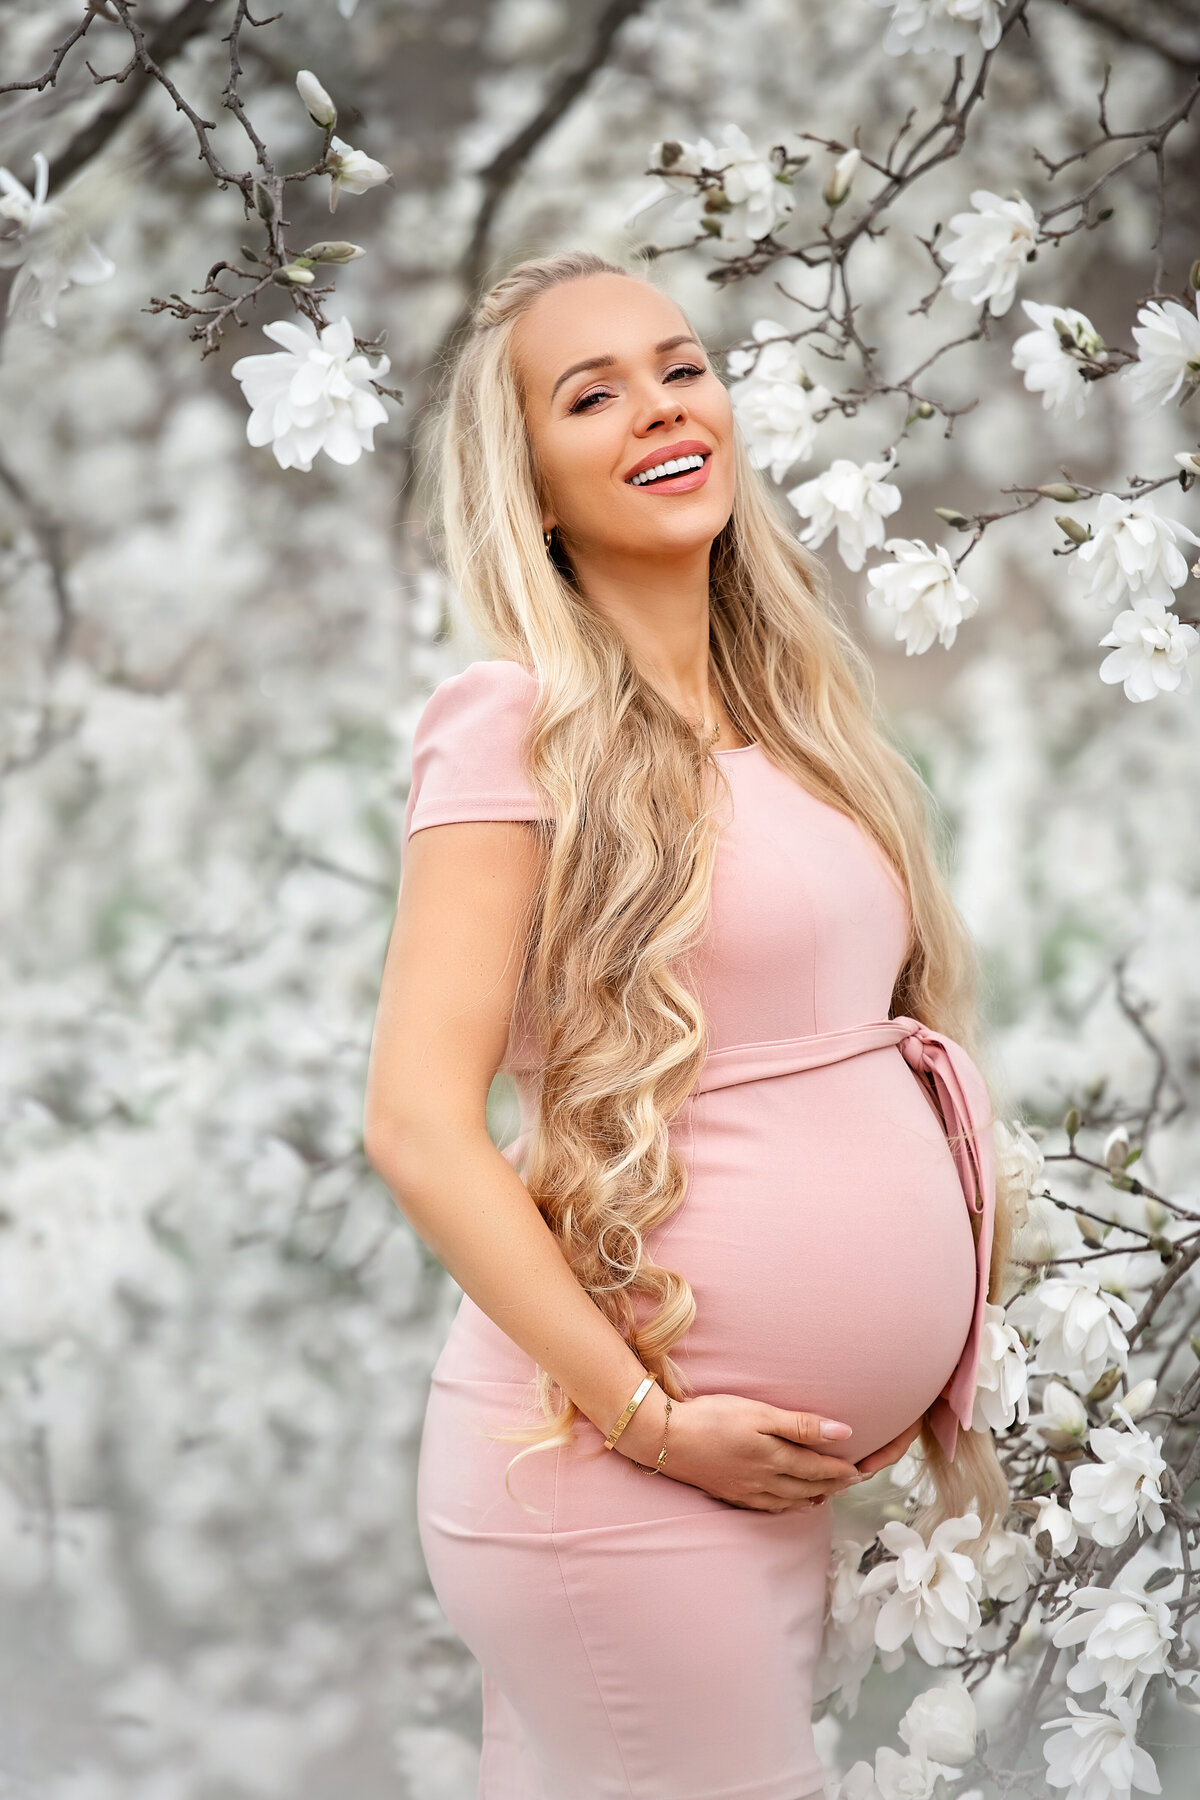 Ieva with long blond Rapunzel hair enjoying last moths of her pregnancy outside in the spring, surrounded by white tree flowers.